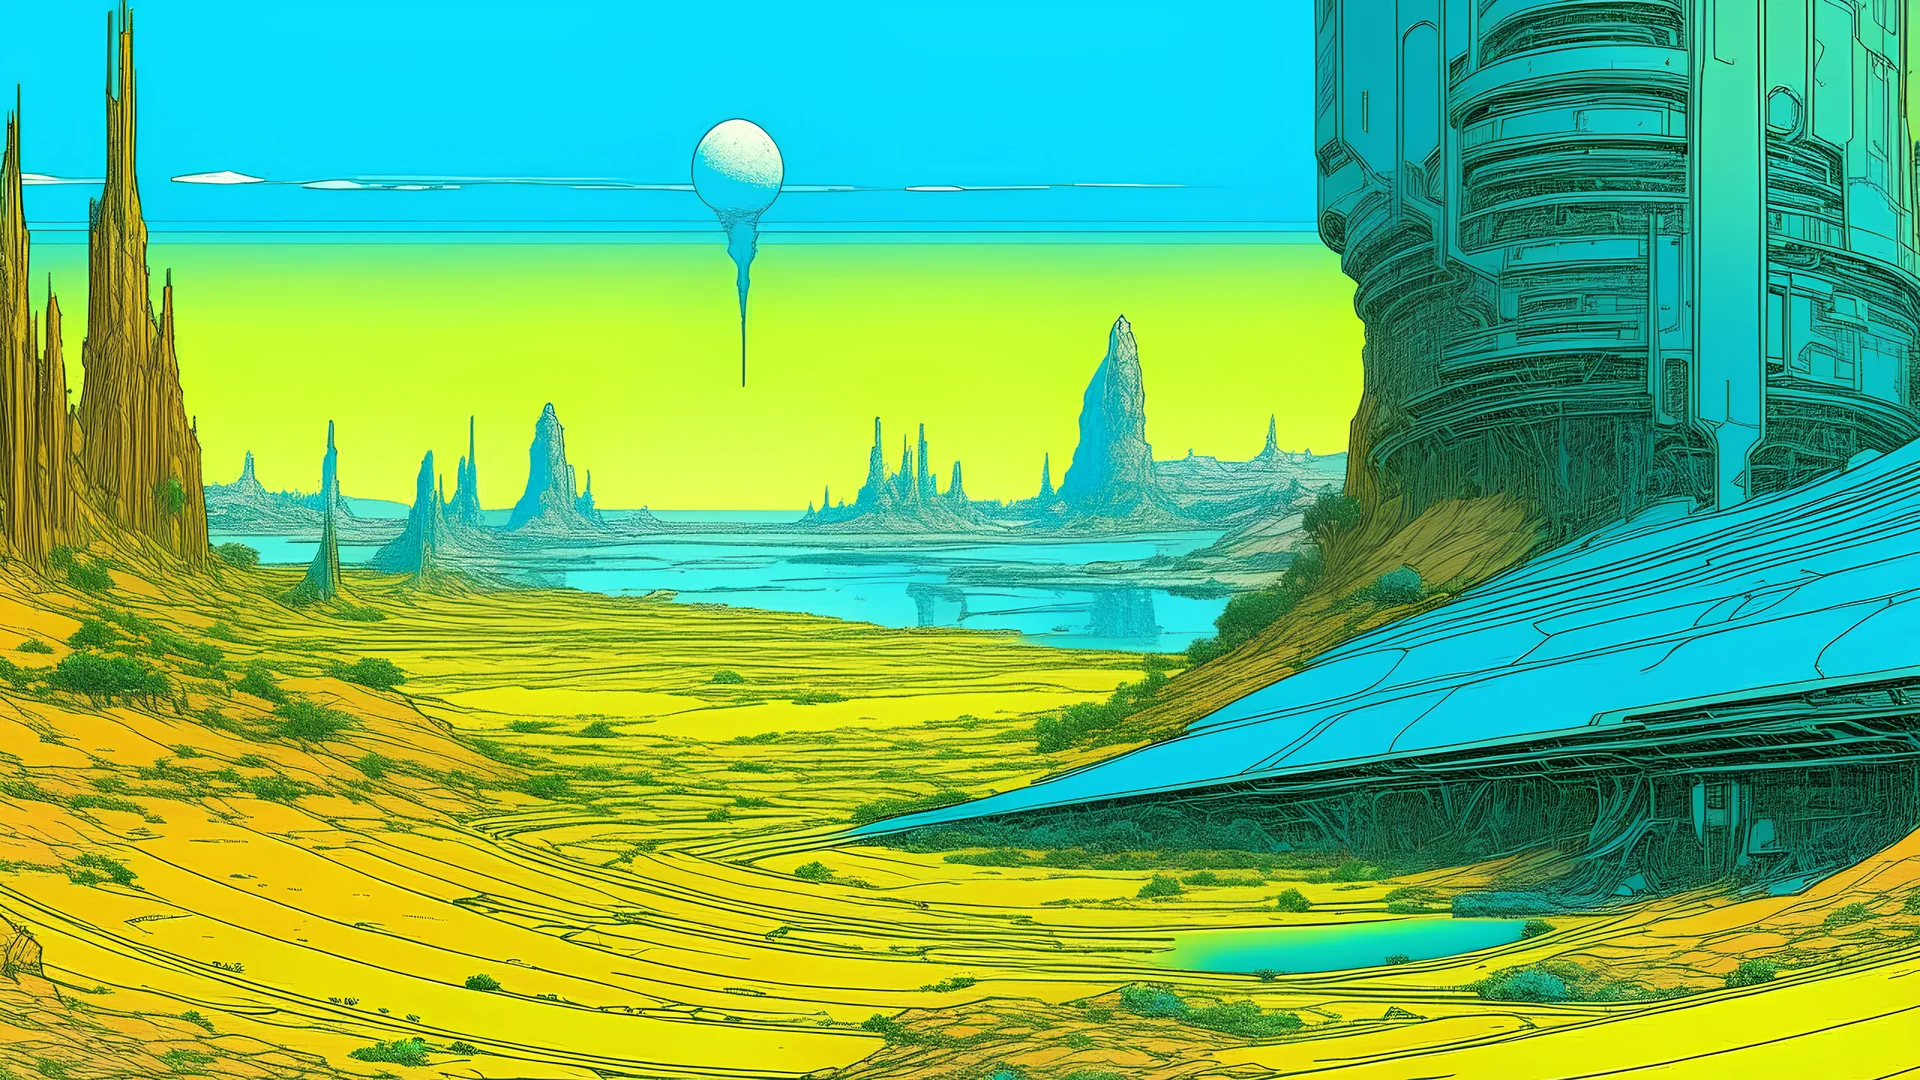 Futuristic serigraphy by Moebius of a person surround by a digital landscape.